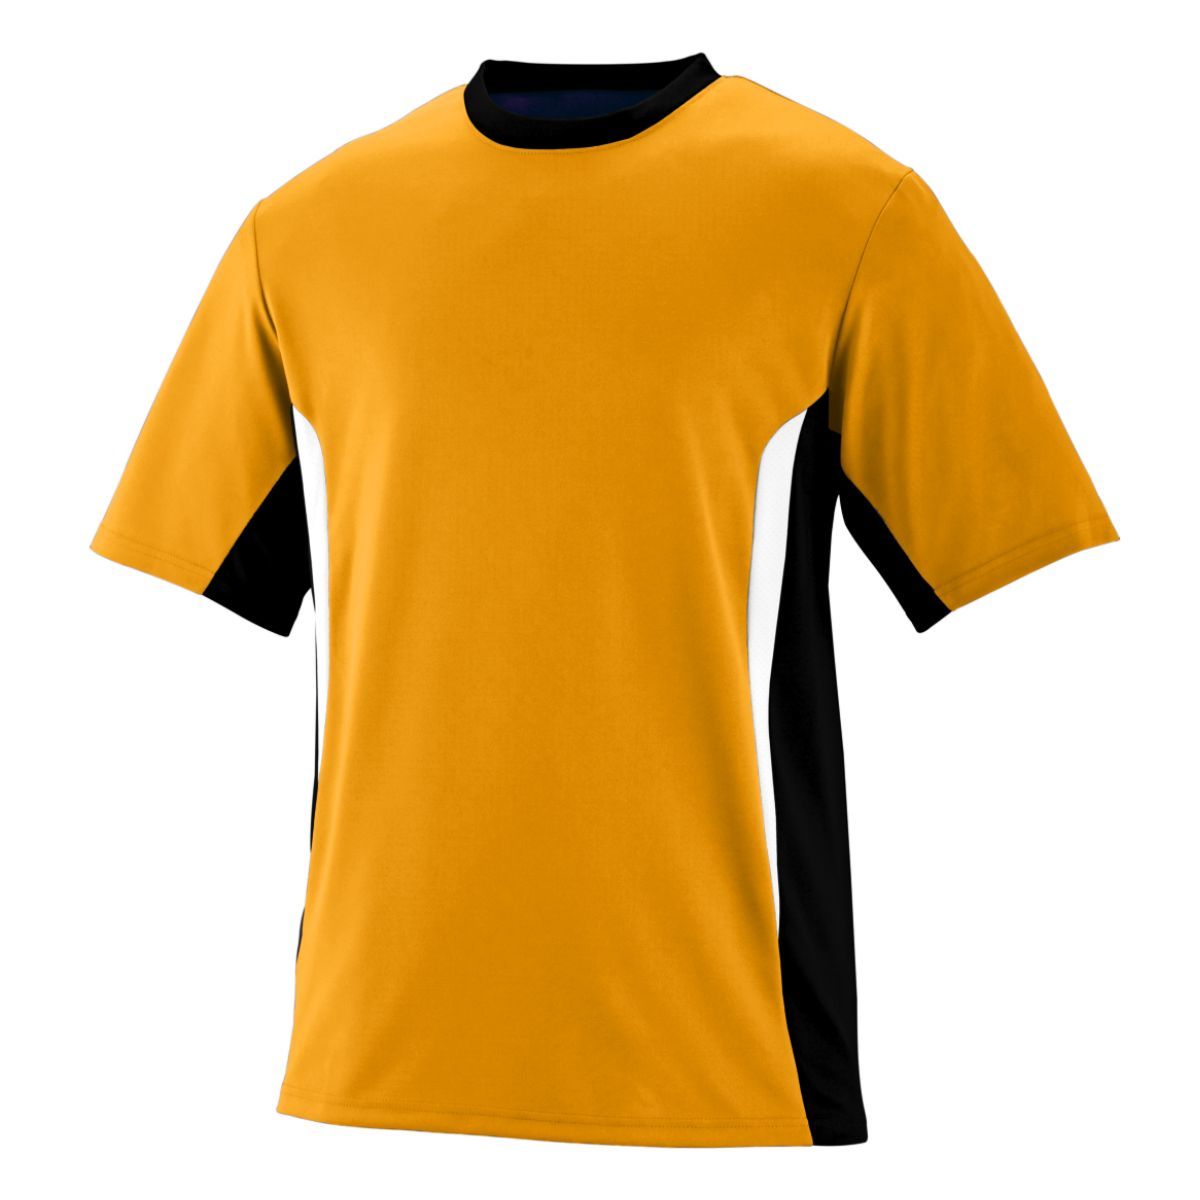 Augusta Sportswear Surge Jersey in Gold/Black/White  -Part of the Adult, Adult-Jersey, Augusta-Products, Softball, Shirts product lines at KanaleyCreations.com